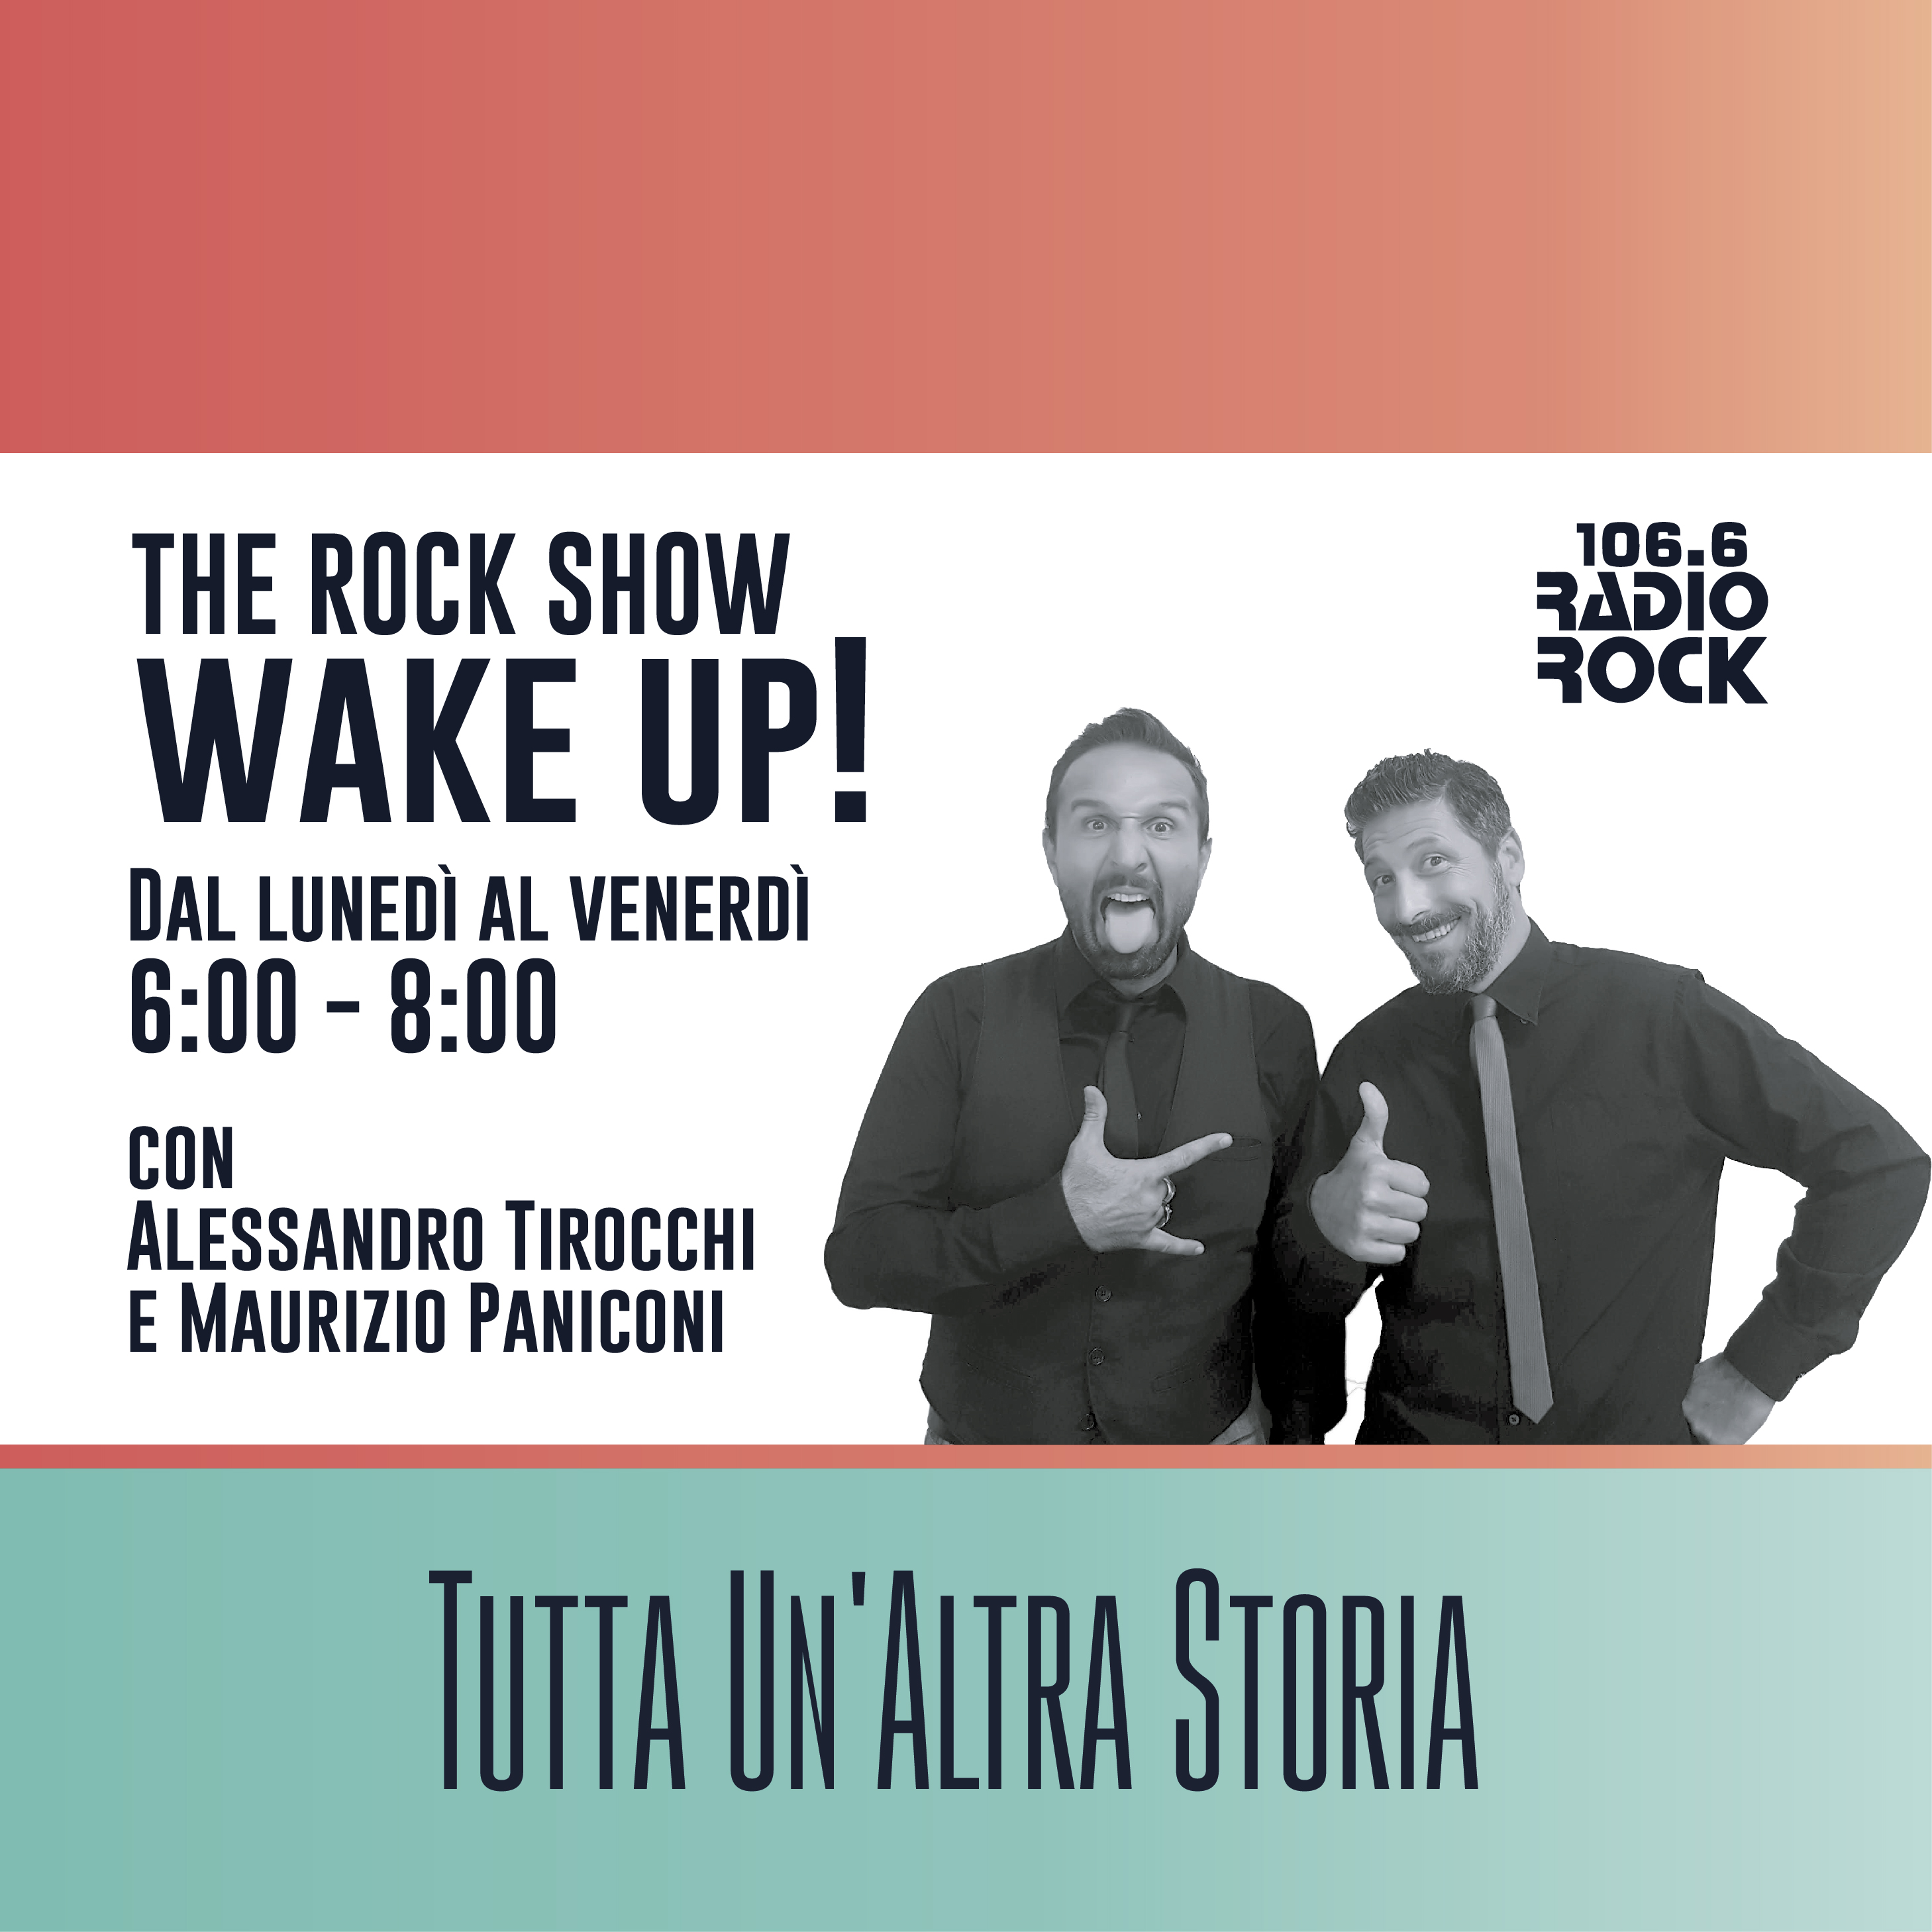 The Rock Show: Wake Up! (02-04-21)